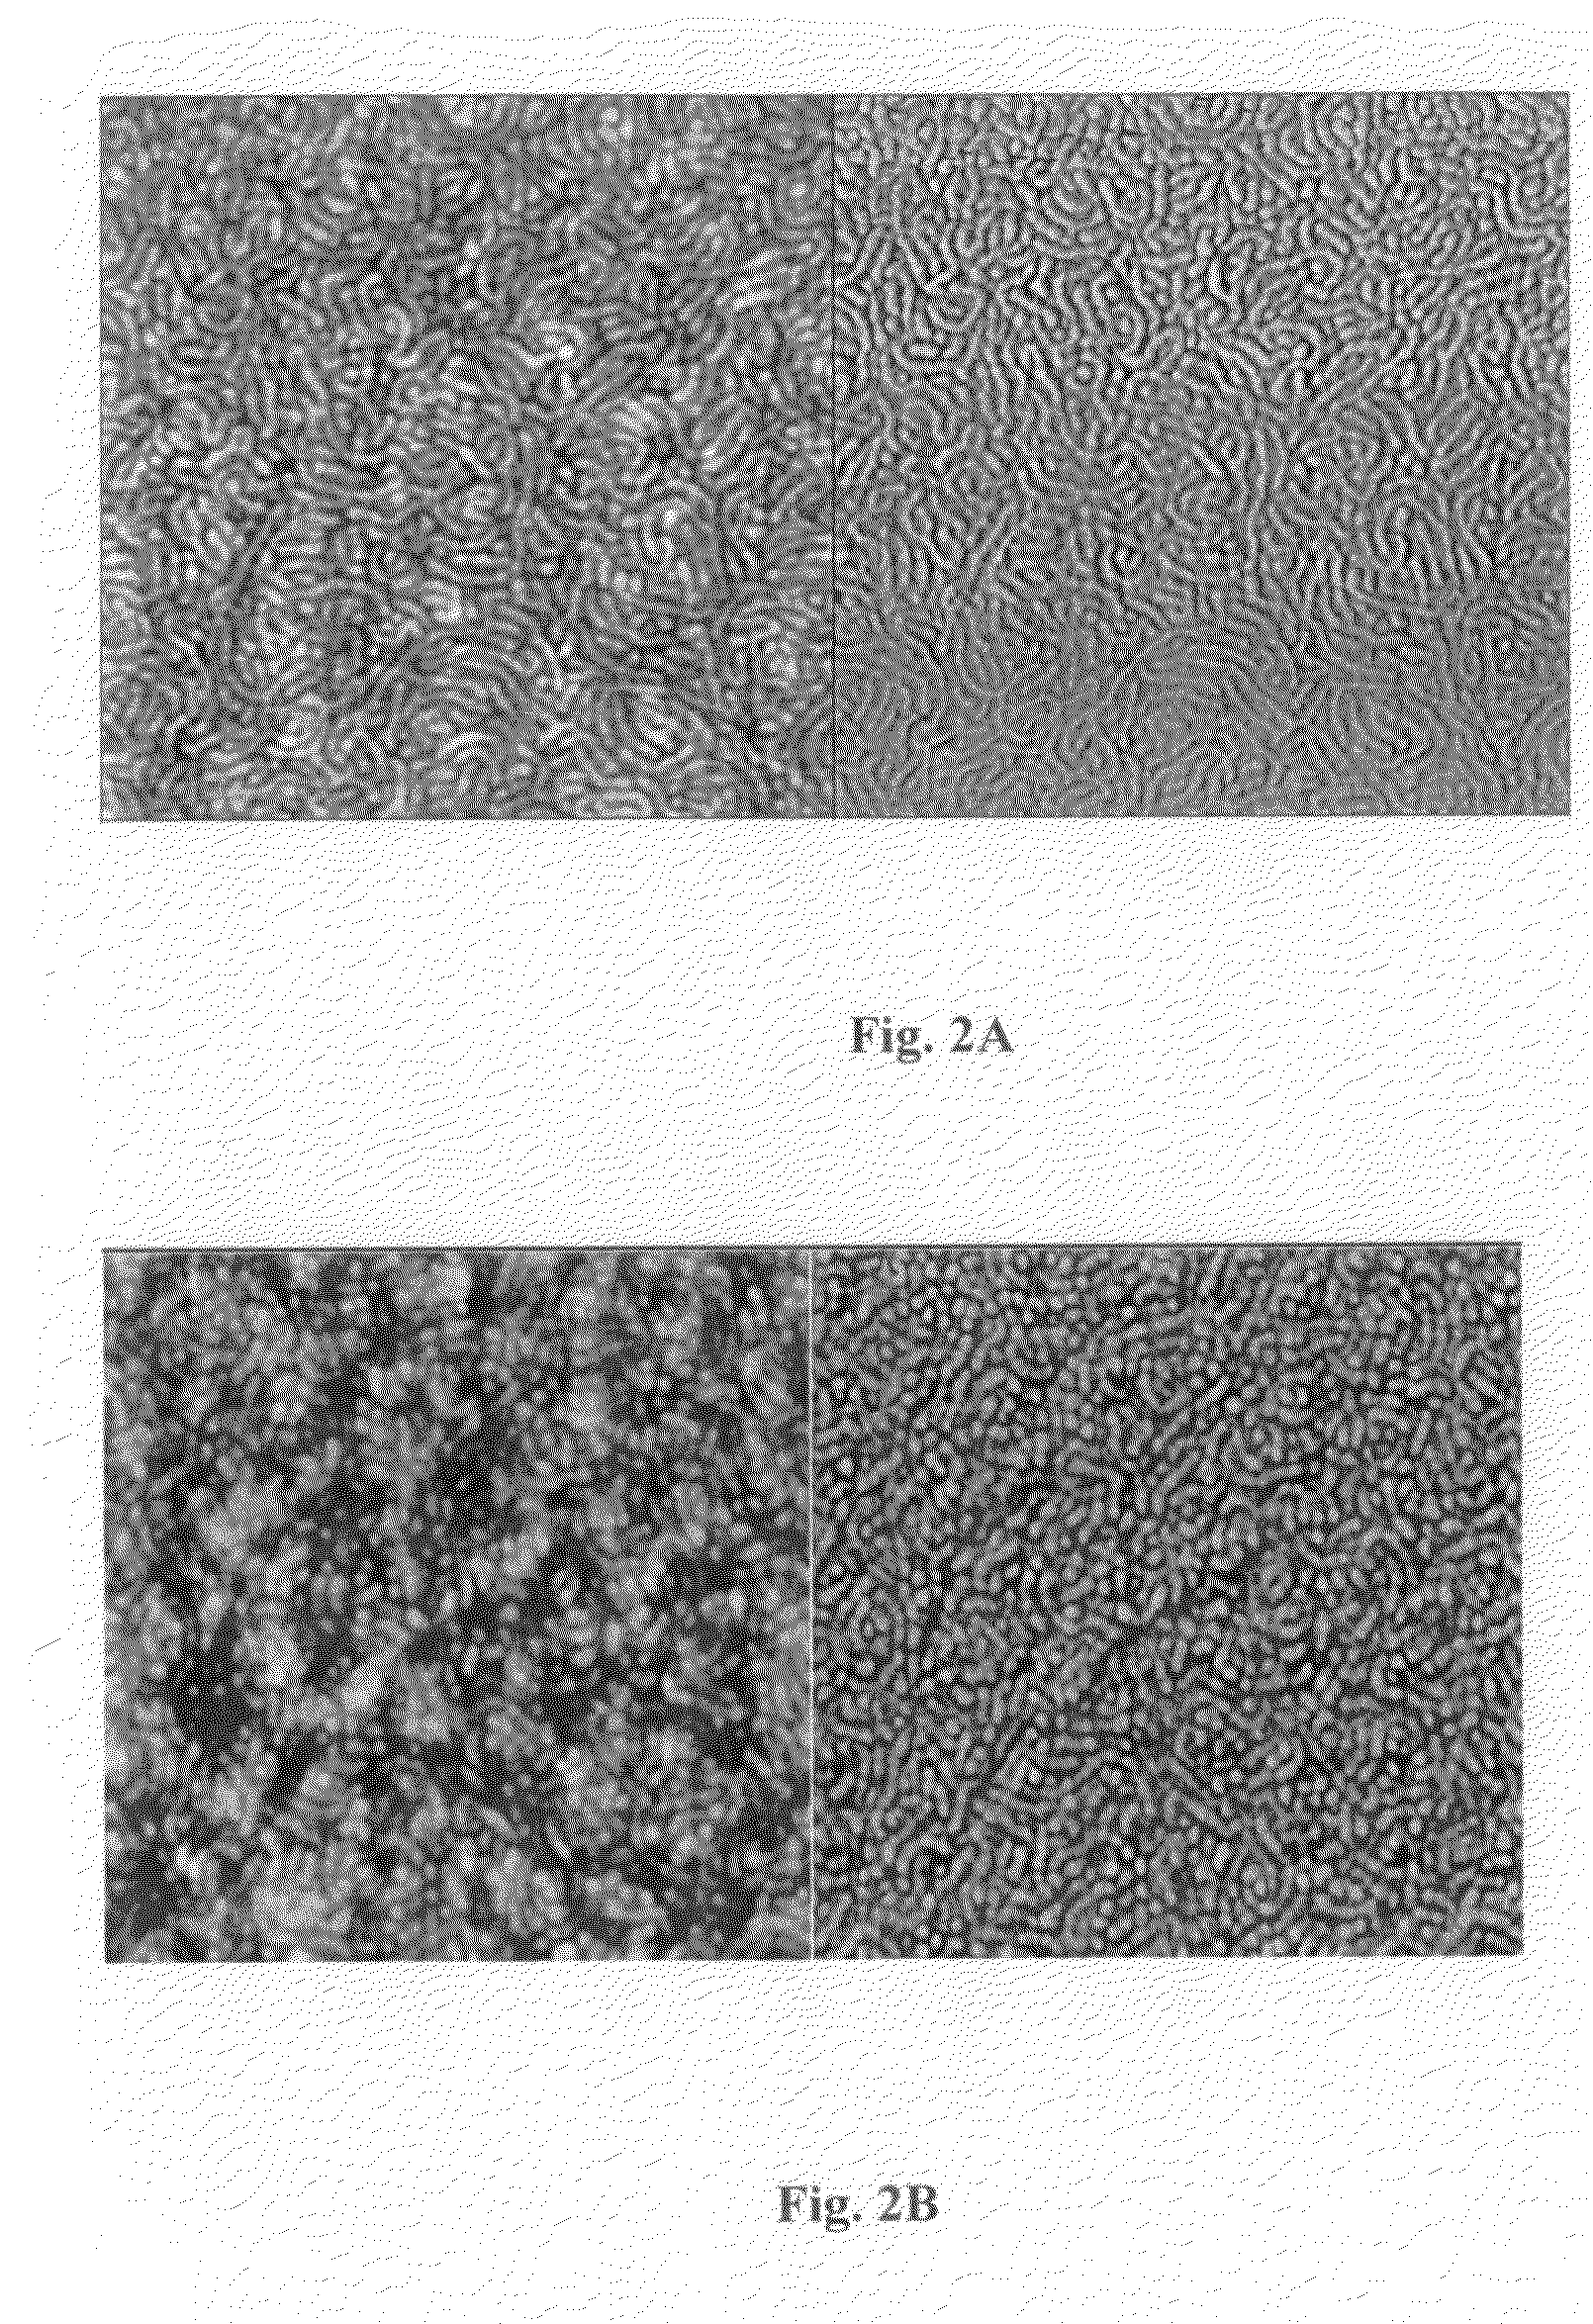 Ferromagnetic block polymers and related methods